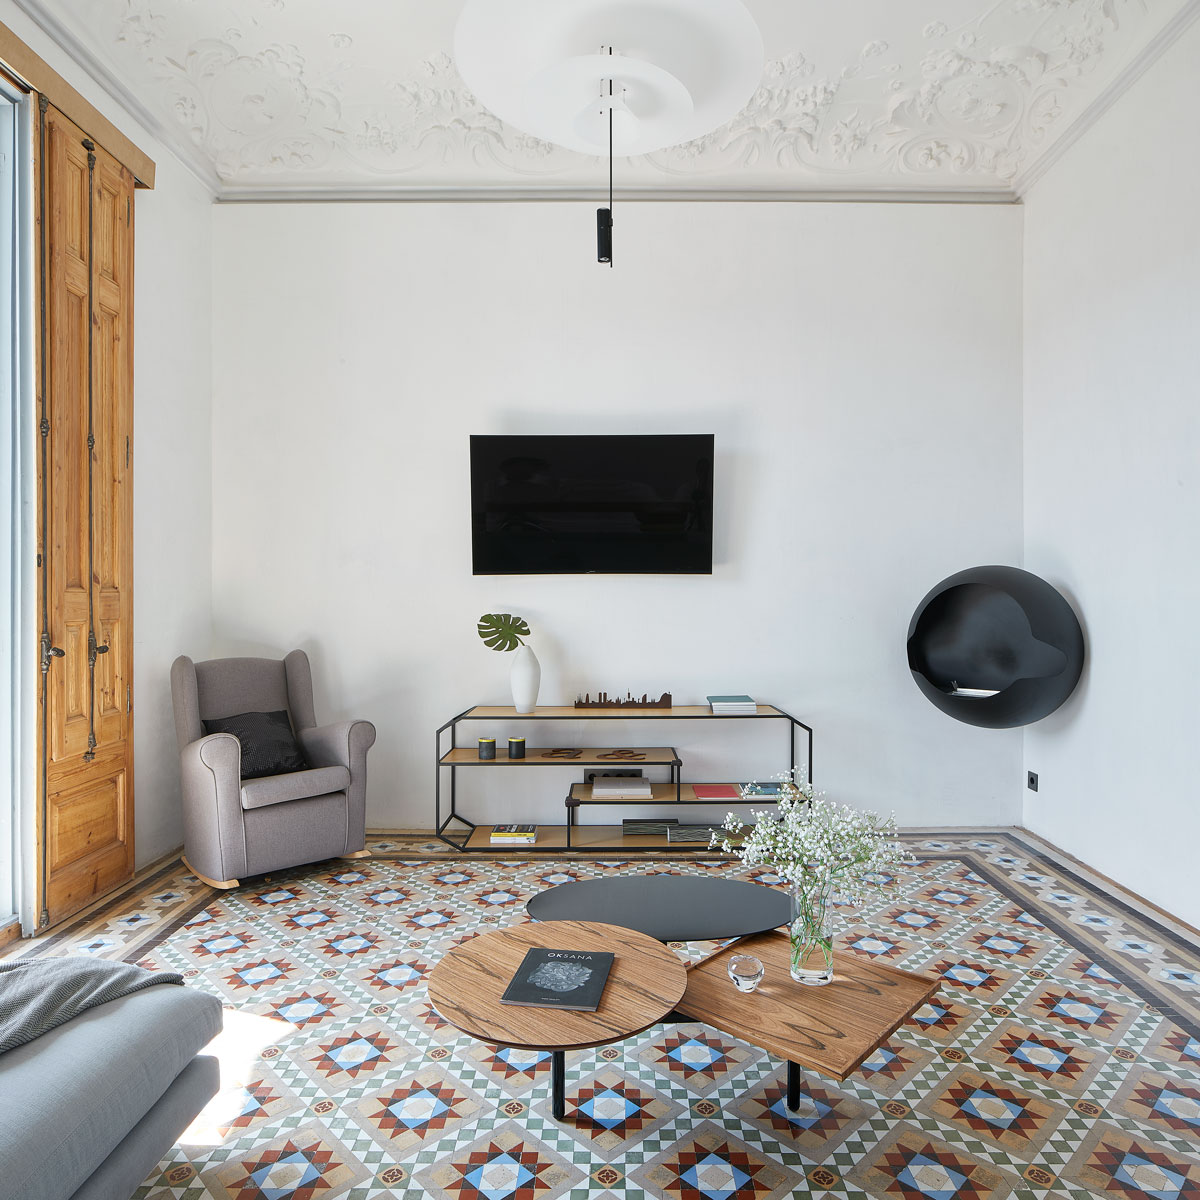 Vibia The Edit - Lighting to Brighten a Historic Barcelona Space - Flamingo